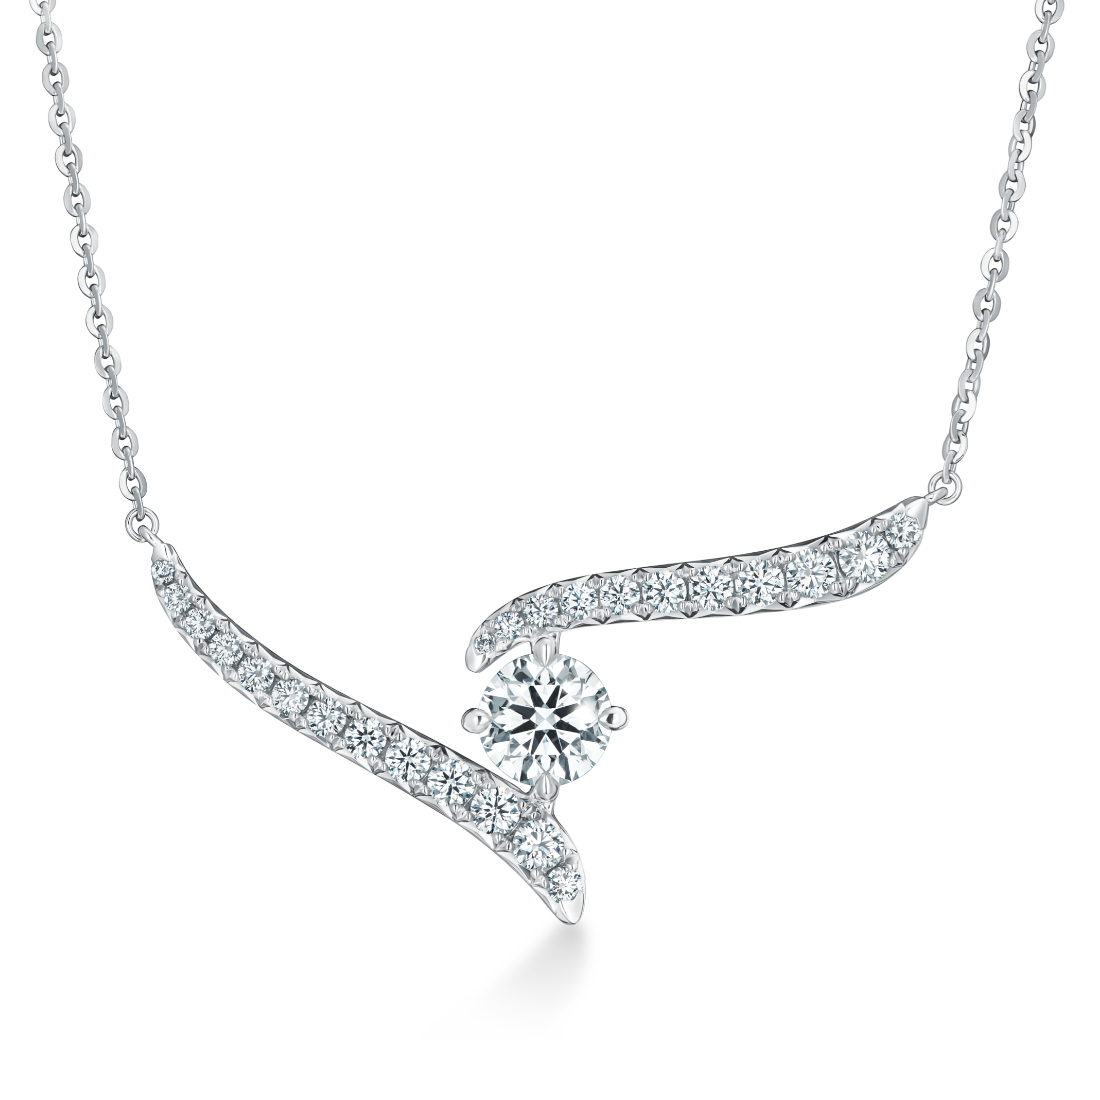 Hearts On Fire 18K White Gold Crossover Diamond Necklace